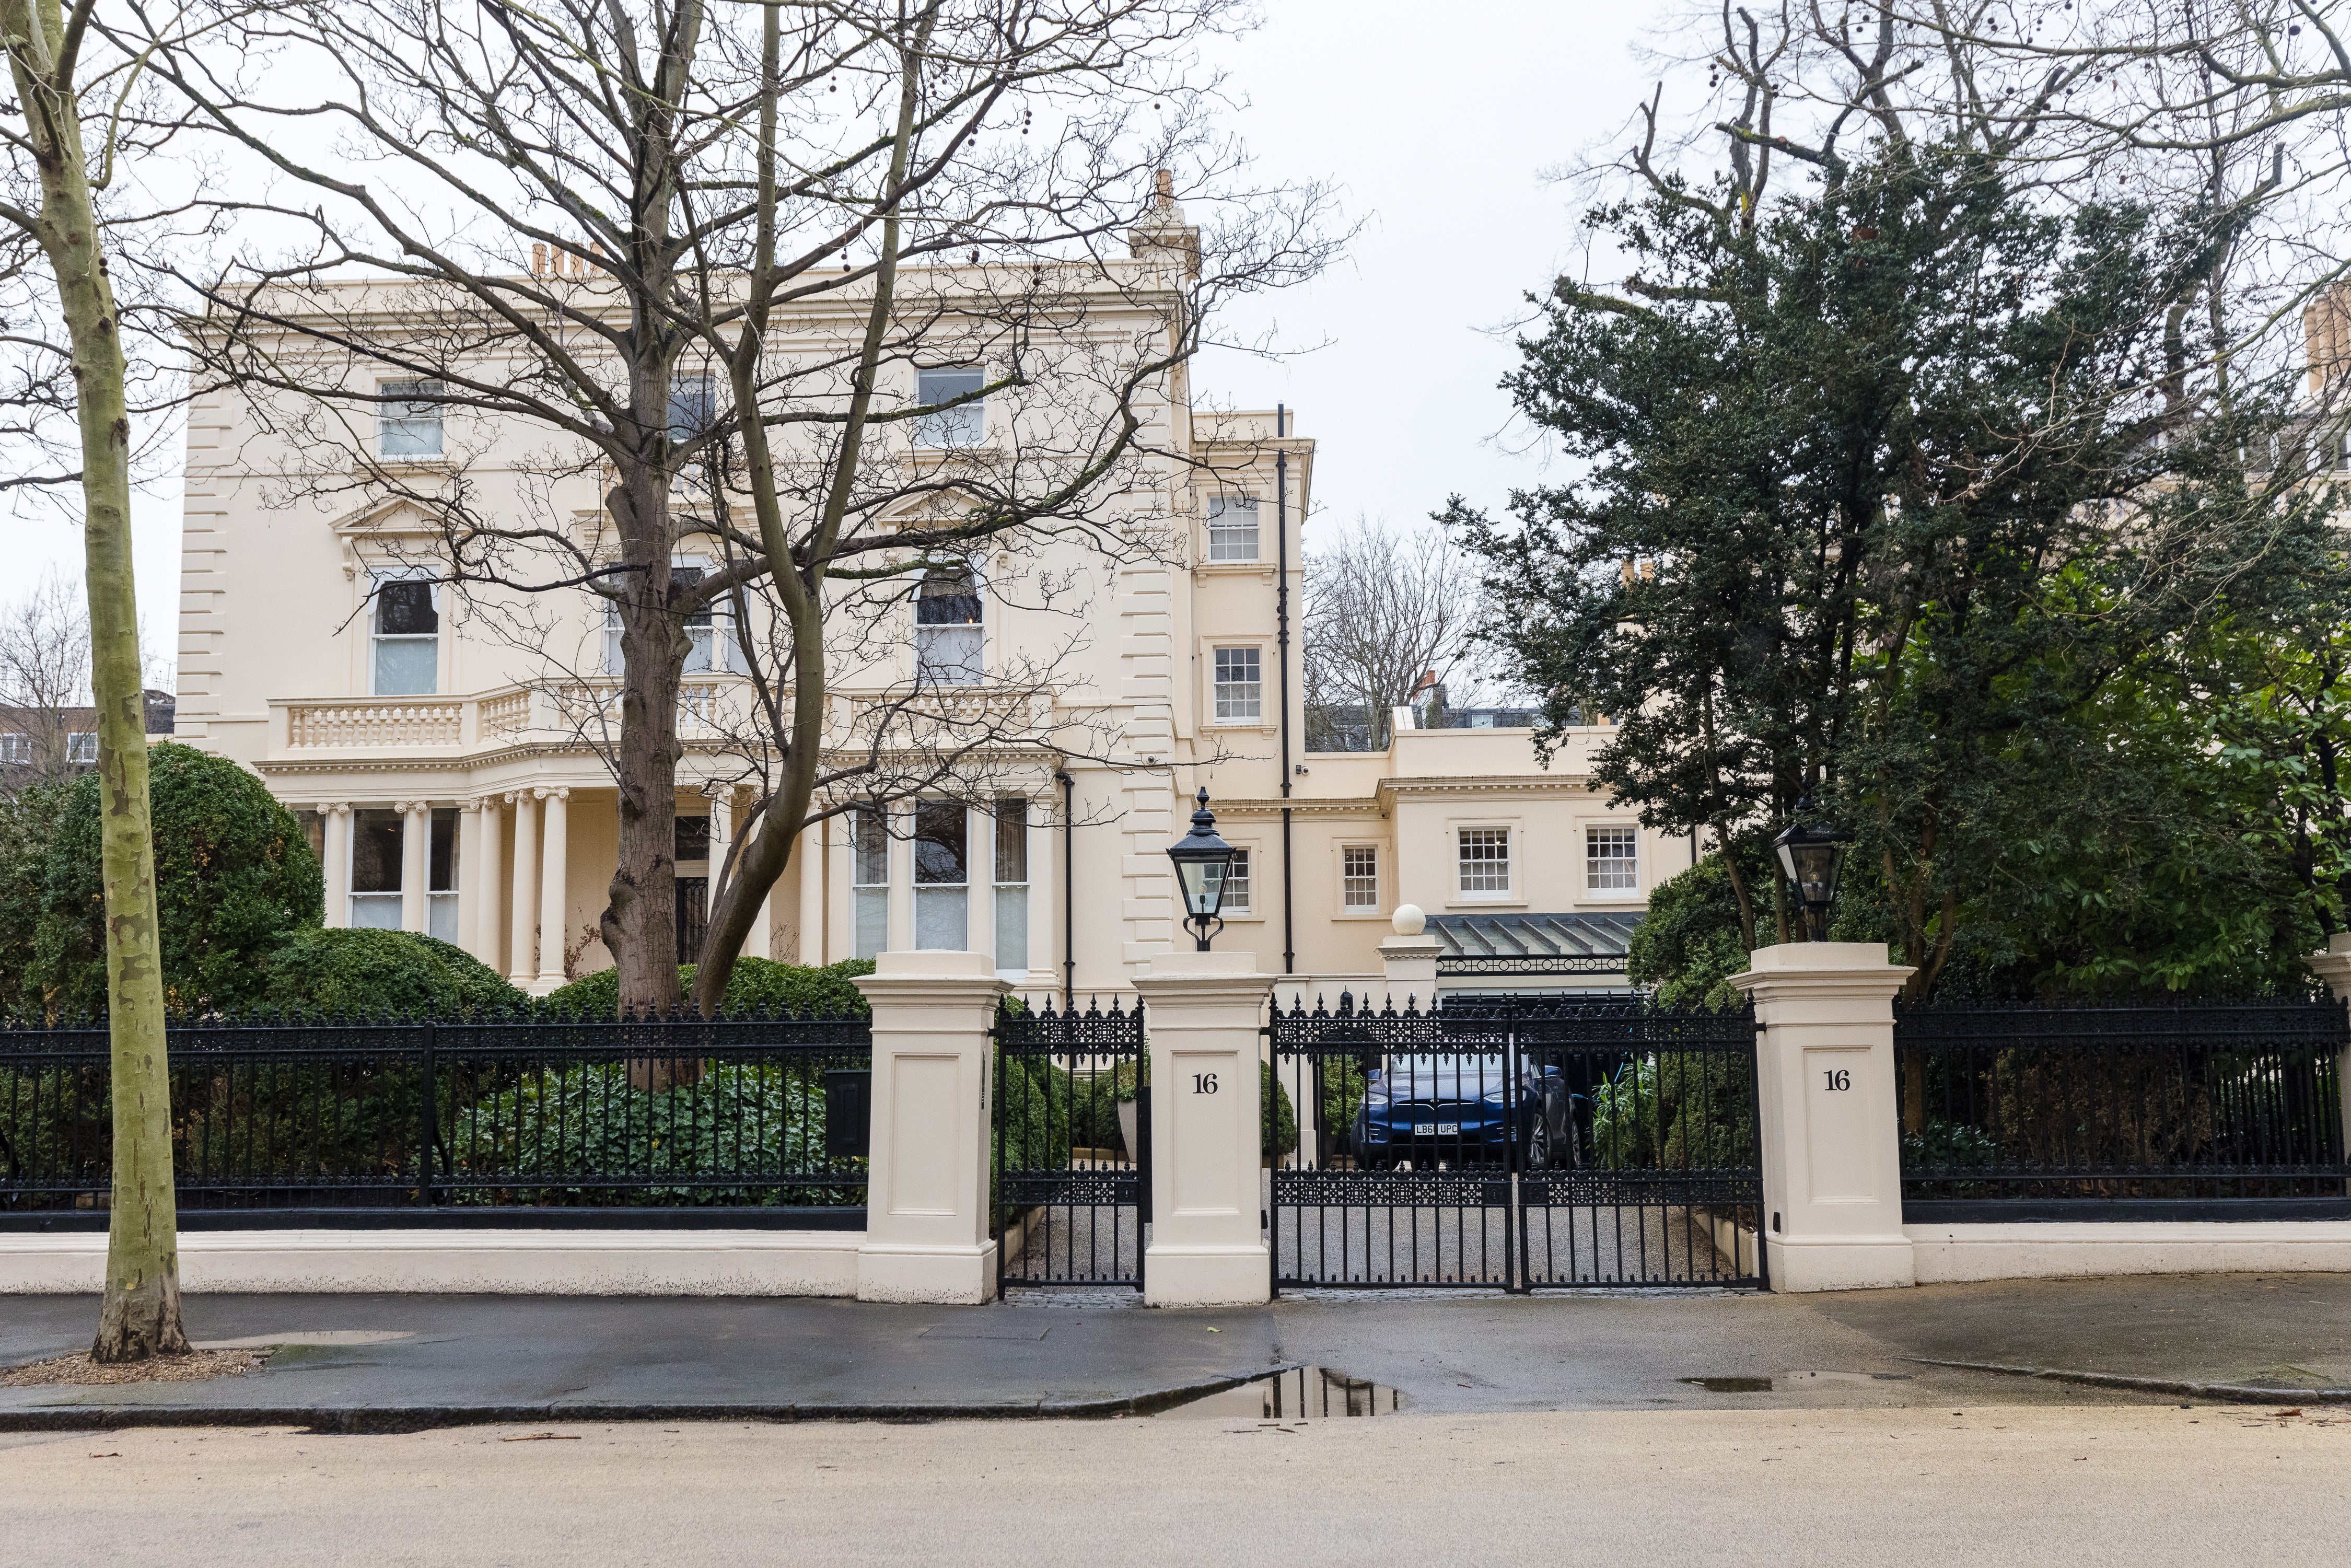 Russian oligarch Roman Abramovich's mansion at Kensington Palace Gardens